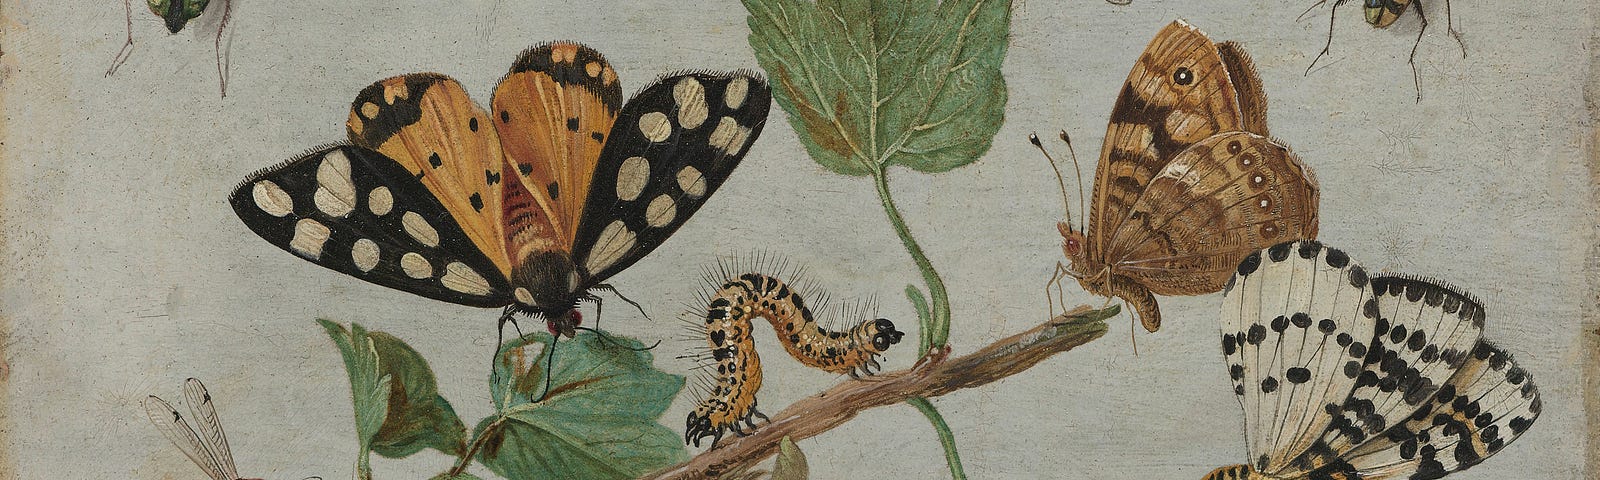 A picture showing caterpillars, butterflies, and various other insects on a branch with white berries.